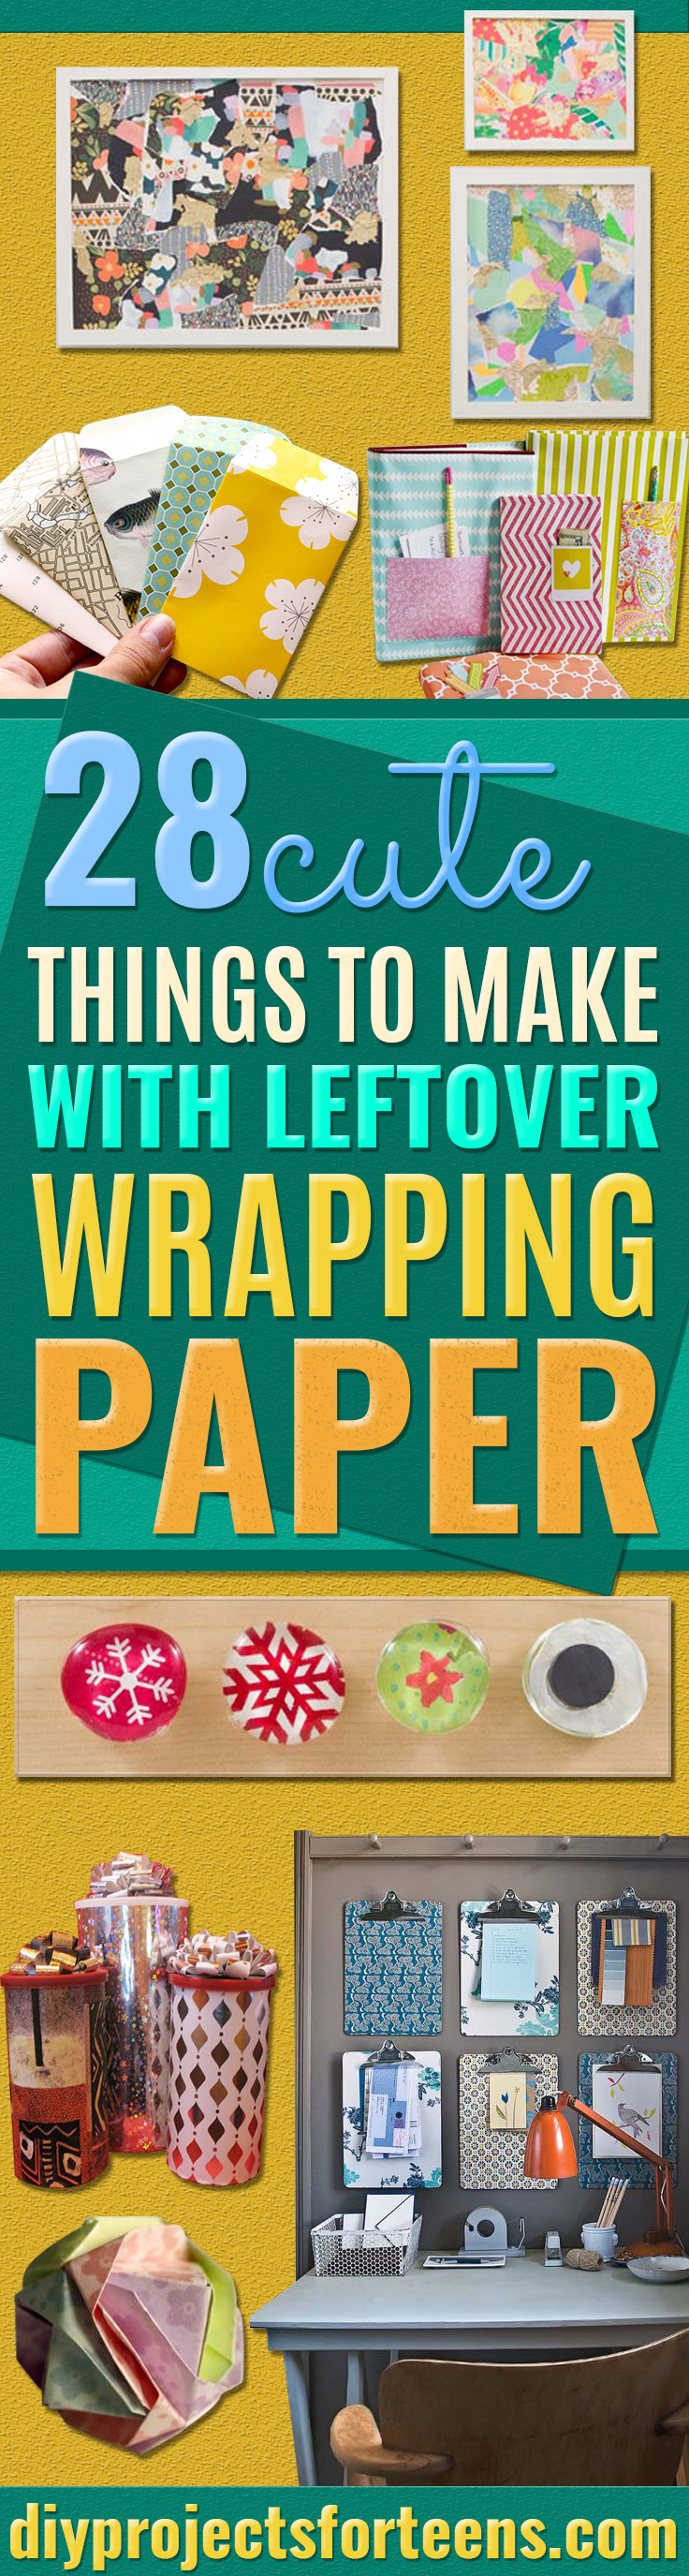 28 Awesome Crafts to Make With Leftover Wrapping Paper